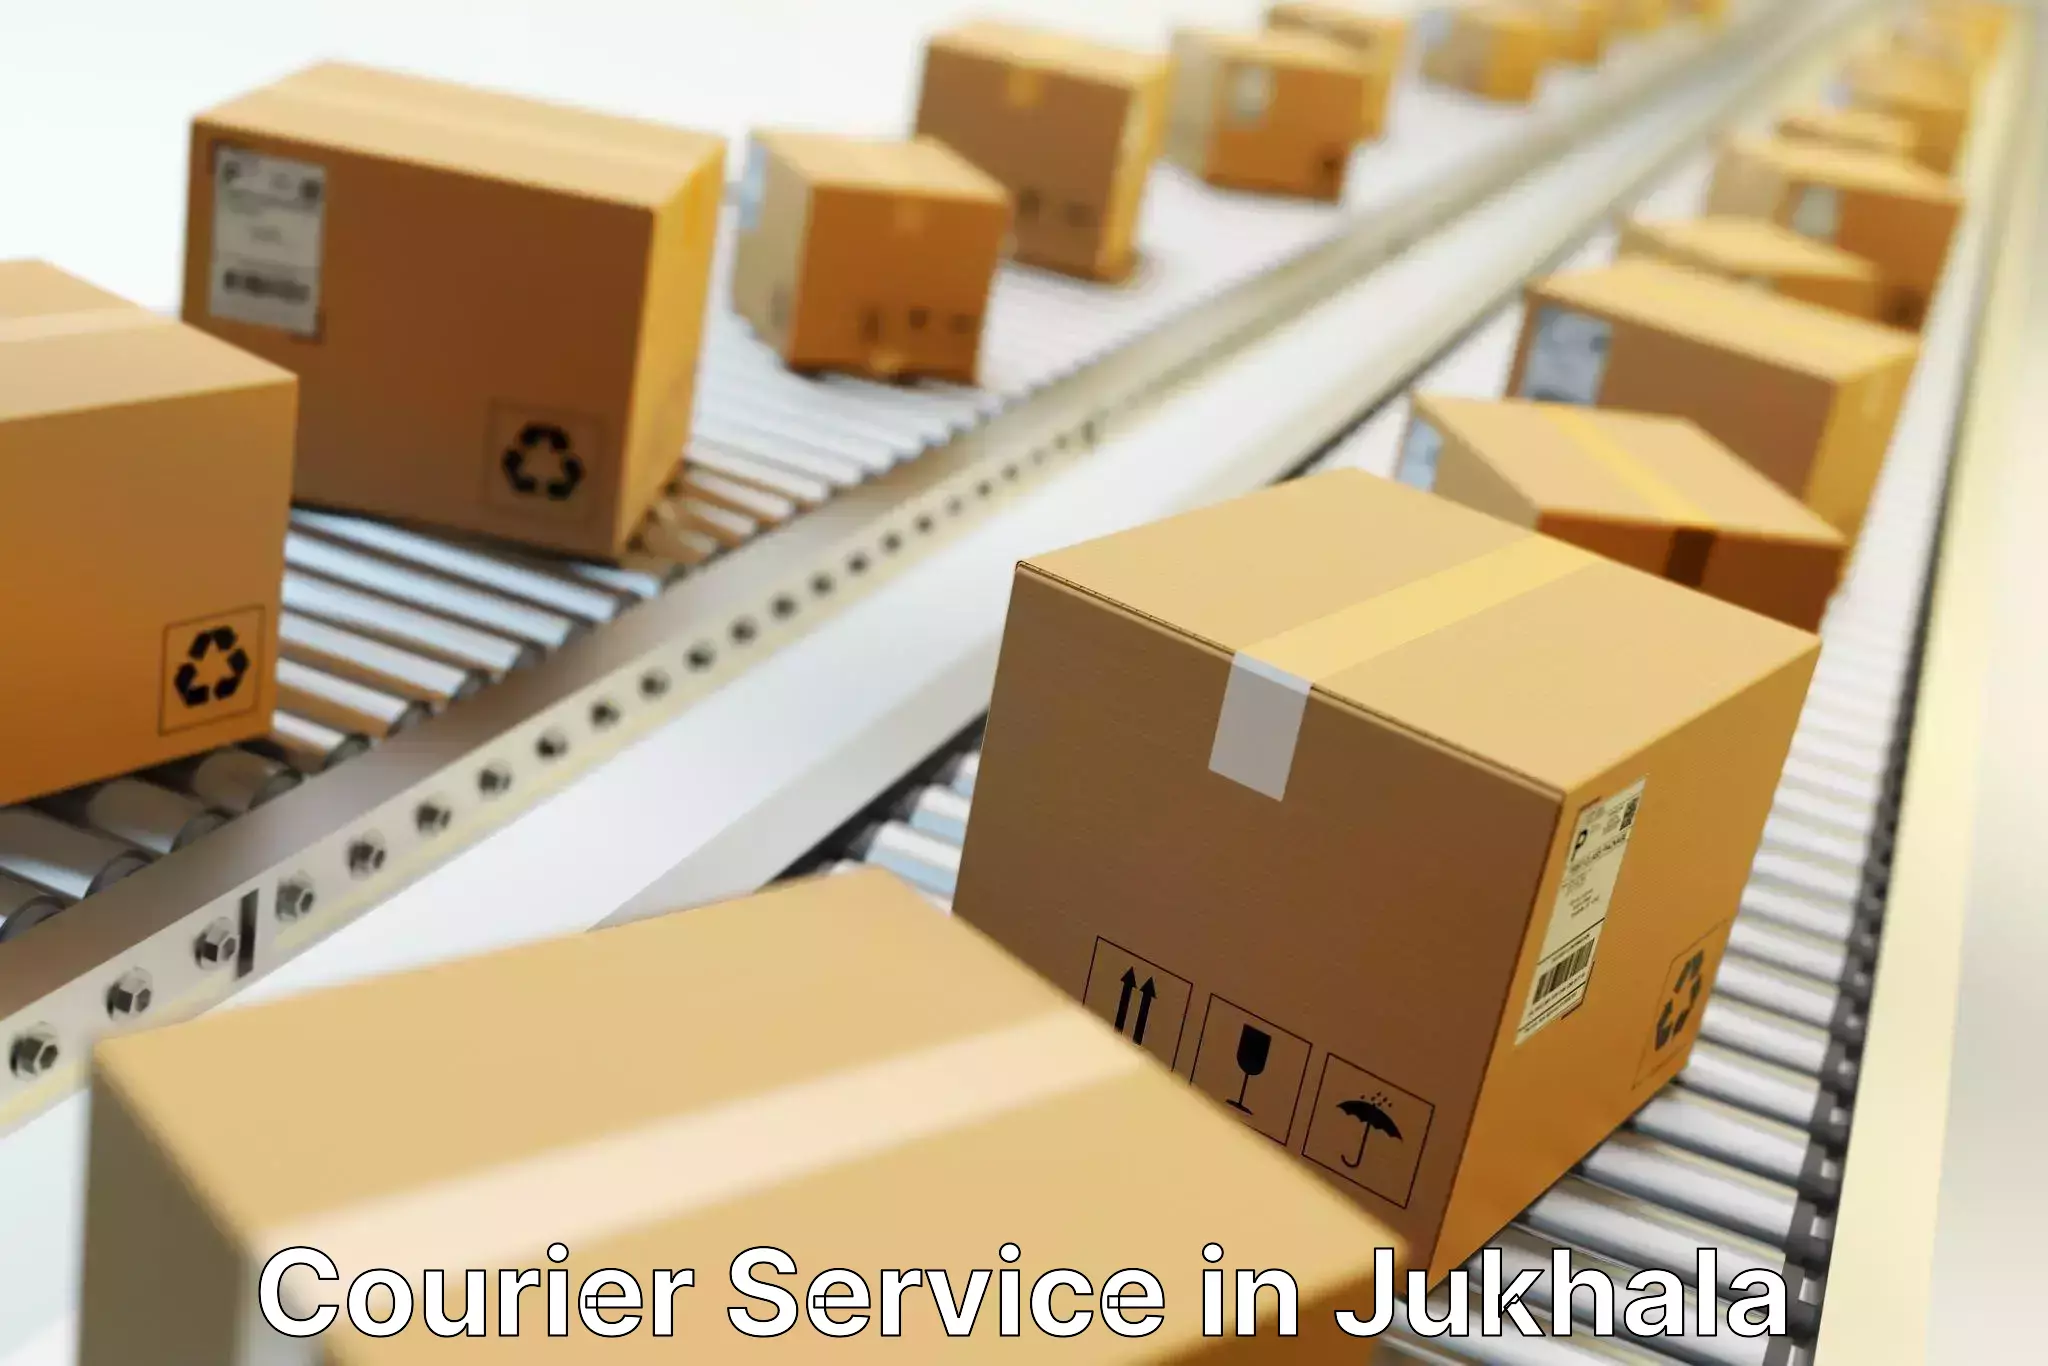 Dynamic courier operations in Jukhala